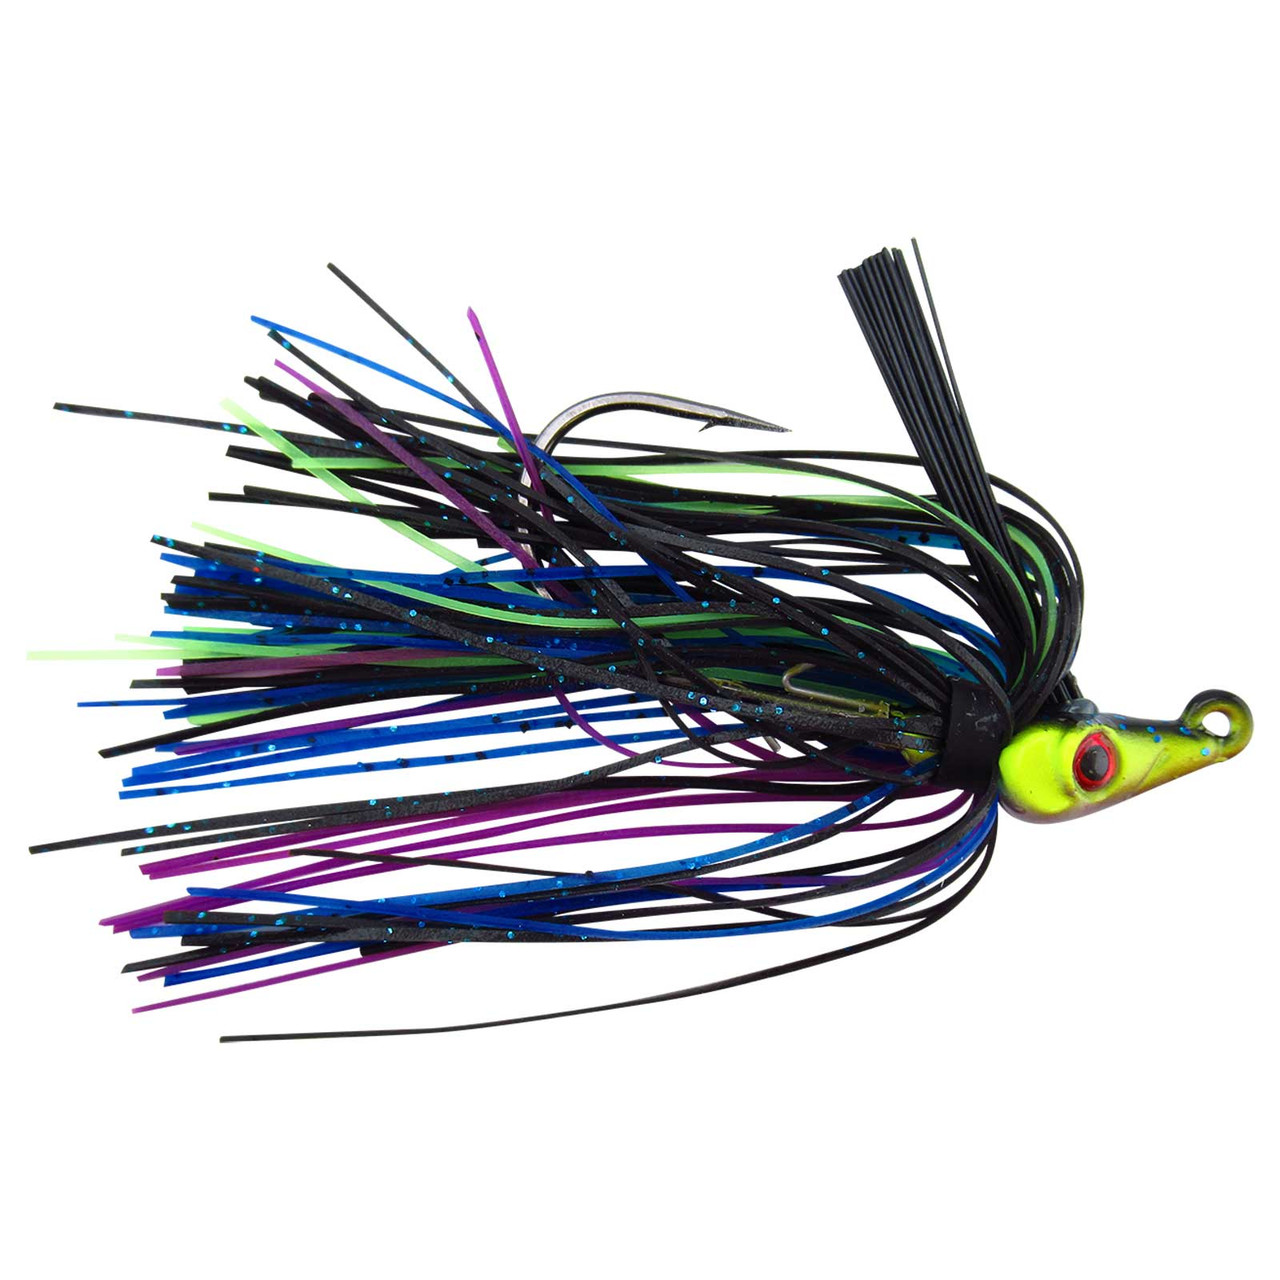 Buy BOOYAH Boo Jig Bass Fishing Lure with Weed Guard Online at